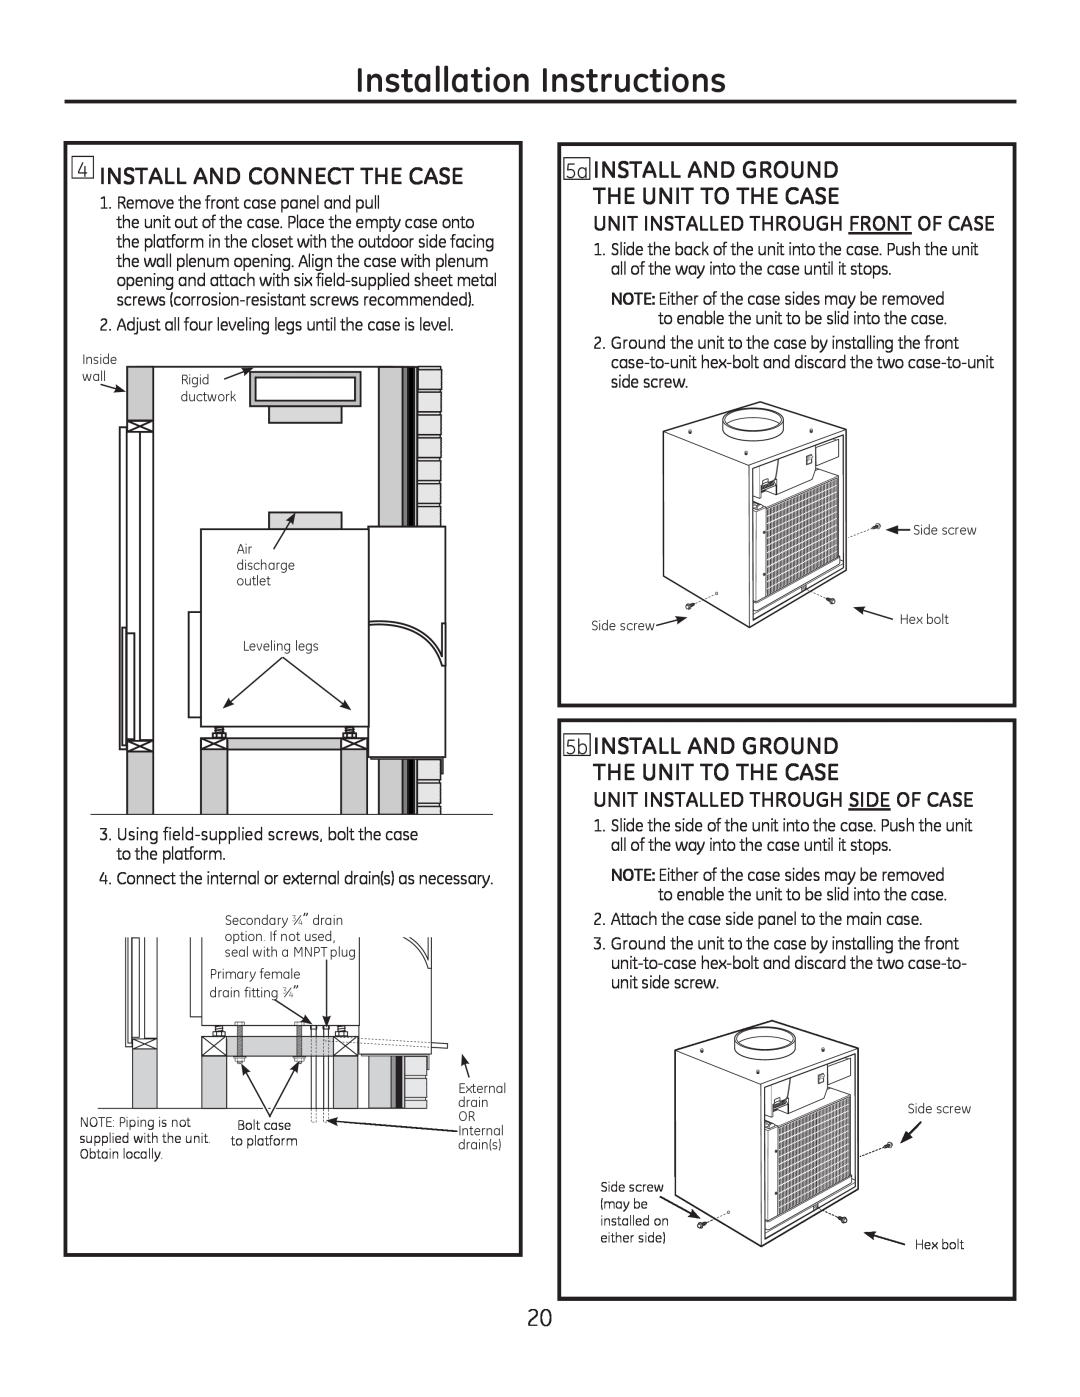 GE 8500 Series Install And Connect The Case, 5a INSTALL AND GROUND THE UNIT TO THE CASE, Installation Instructions 